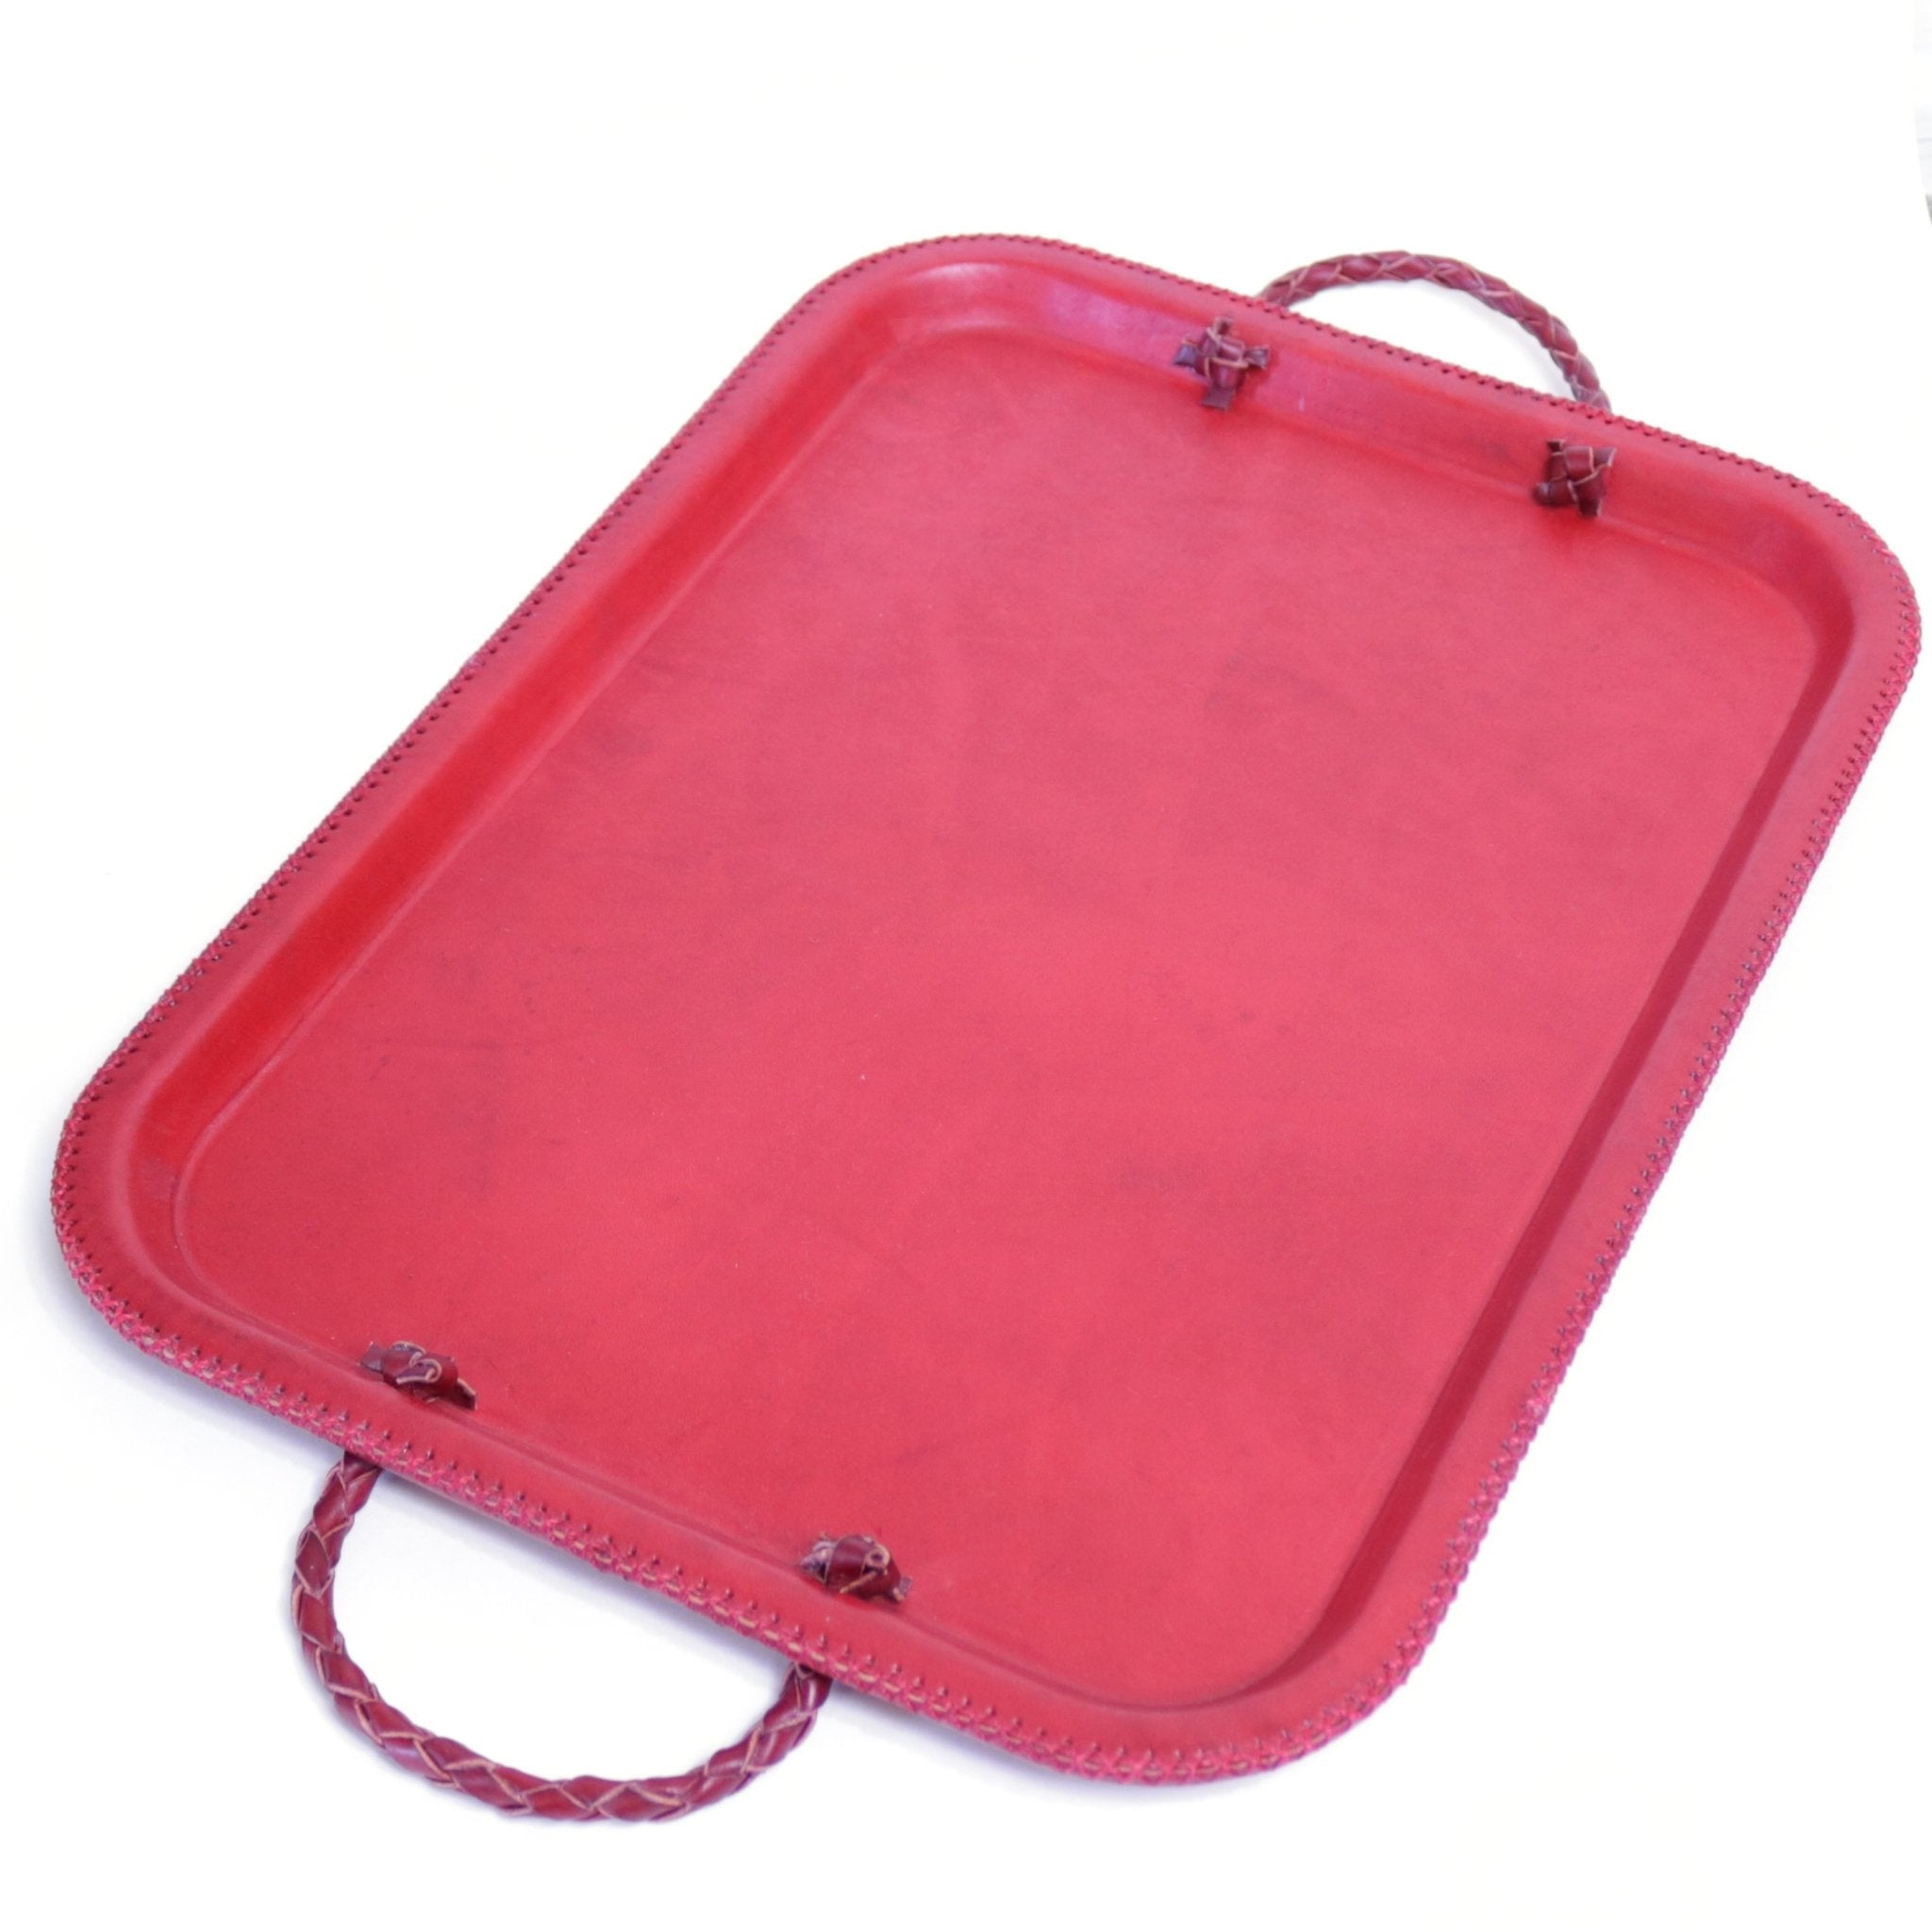 Hermana | Leather Serving Tray with Braided Handlescategory_Kitchen & Dining from Bati - SHOPELEOS